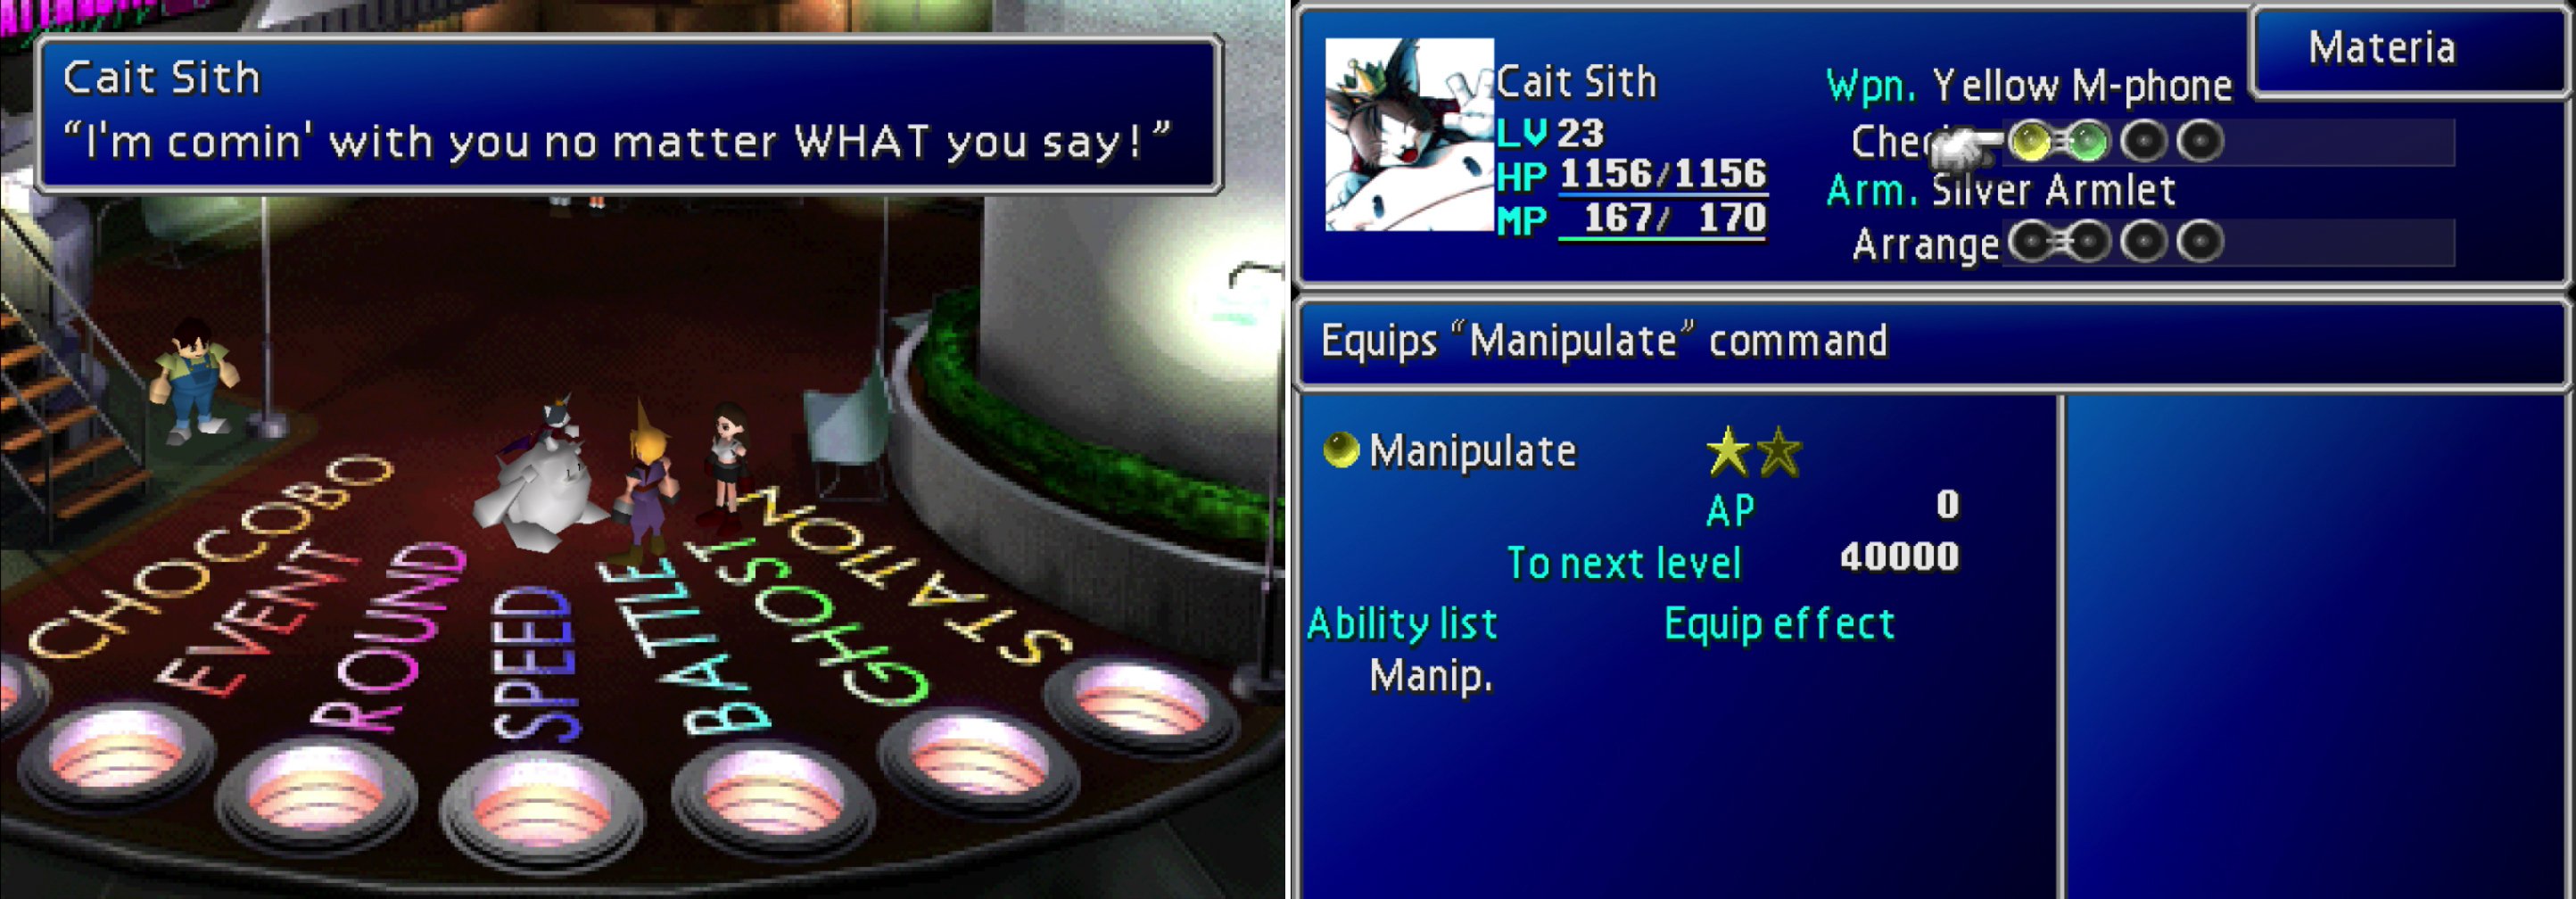 After telling a couple of dubious fortures, Cait Sith will invite itself along (left). On the plus side, this annoying automaton has some Manipulate Materia equipped when it joined (right).